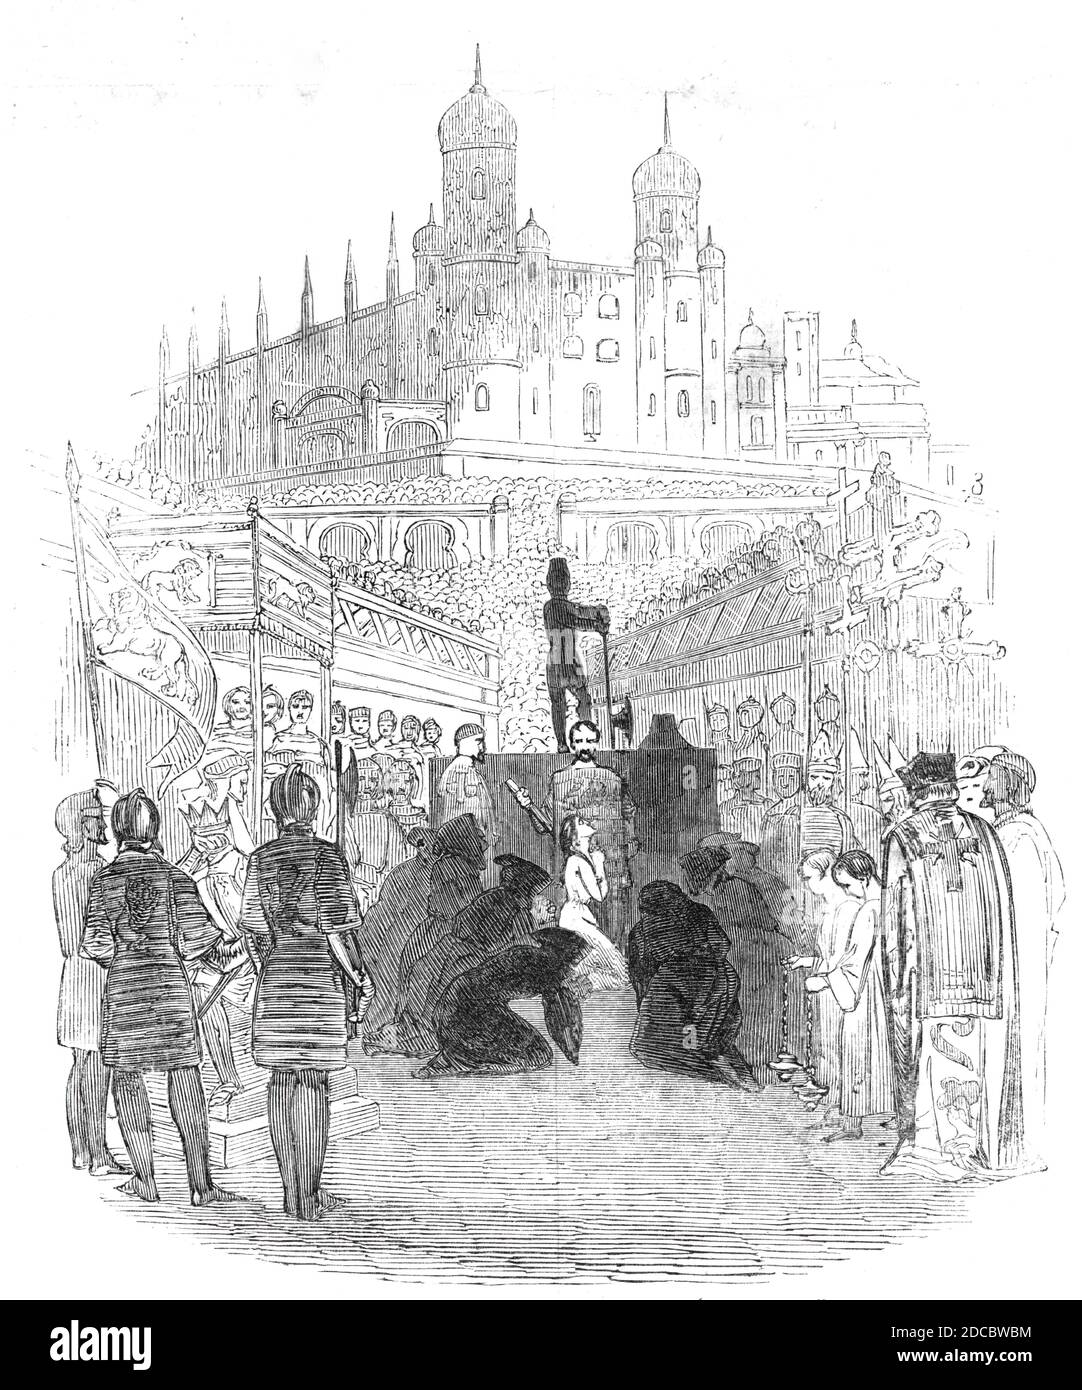 Scene from Balfe's opera &quot;The Daughter of St. Mark&quot;, 1844. Production at the Drury Lane Theatre in London. 'This extraordinary scene is, in the language of the libretto, a &quot;Public Place in Nicosia&quot;, the capital of Cyprus. In the centre is an elevated stage, or scaffold, hung with black cloth, upon which stands the headsman; and an avenue of soldiers extends from thence to the front of the stage. On either side are erected superb pavilions for the King, Court, Archbishop, and Clergy. In the square formed by the soldiery, Black and Grey Penitents are kneeling. Immediately ben Stock Photo